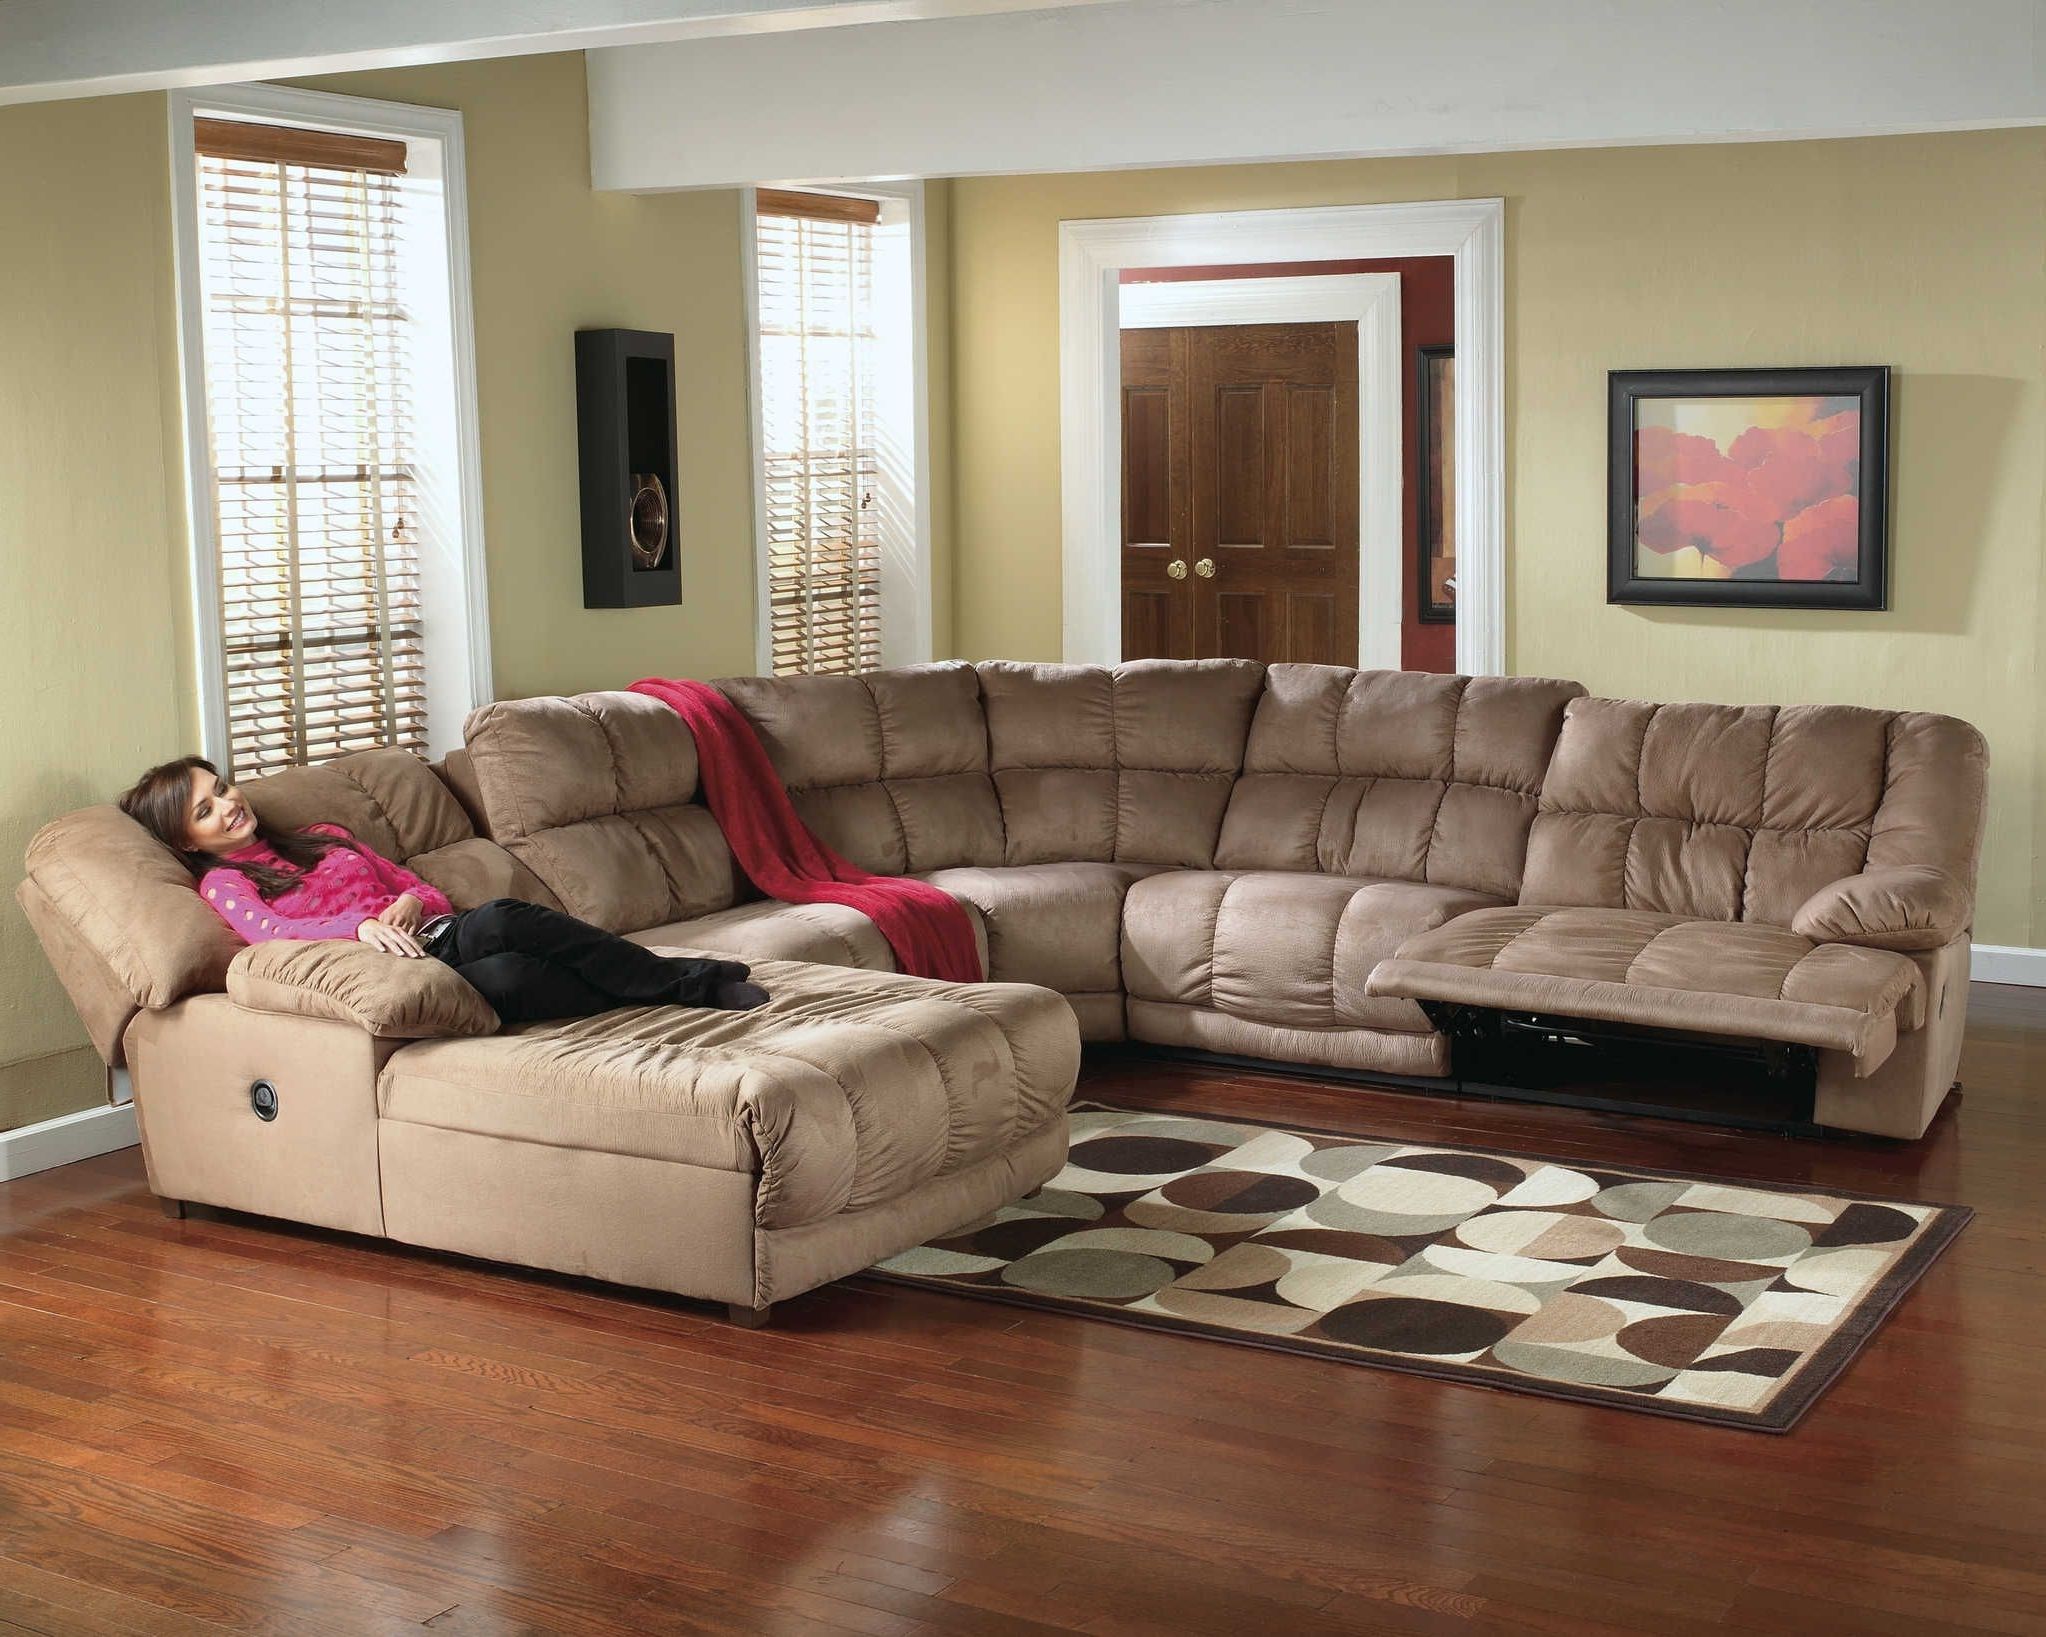 Recliner Chaise Inside Sectional Sofas With Recliners And Chaise (View 1 of 15)